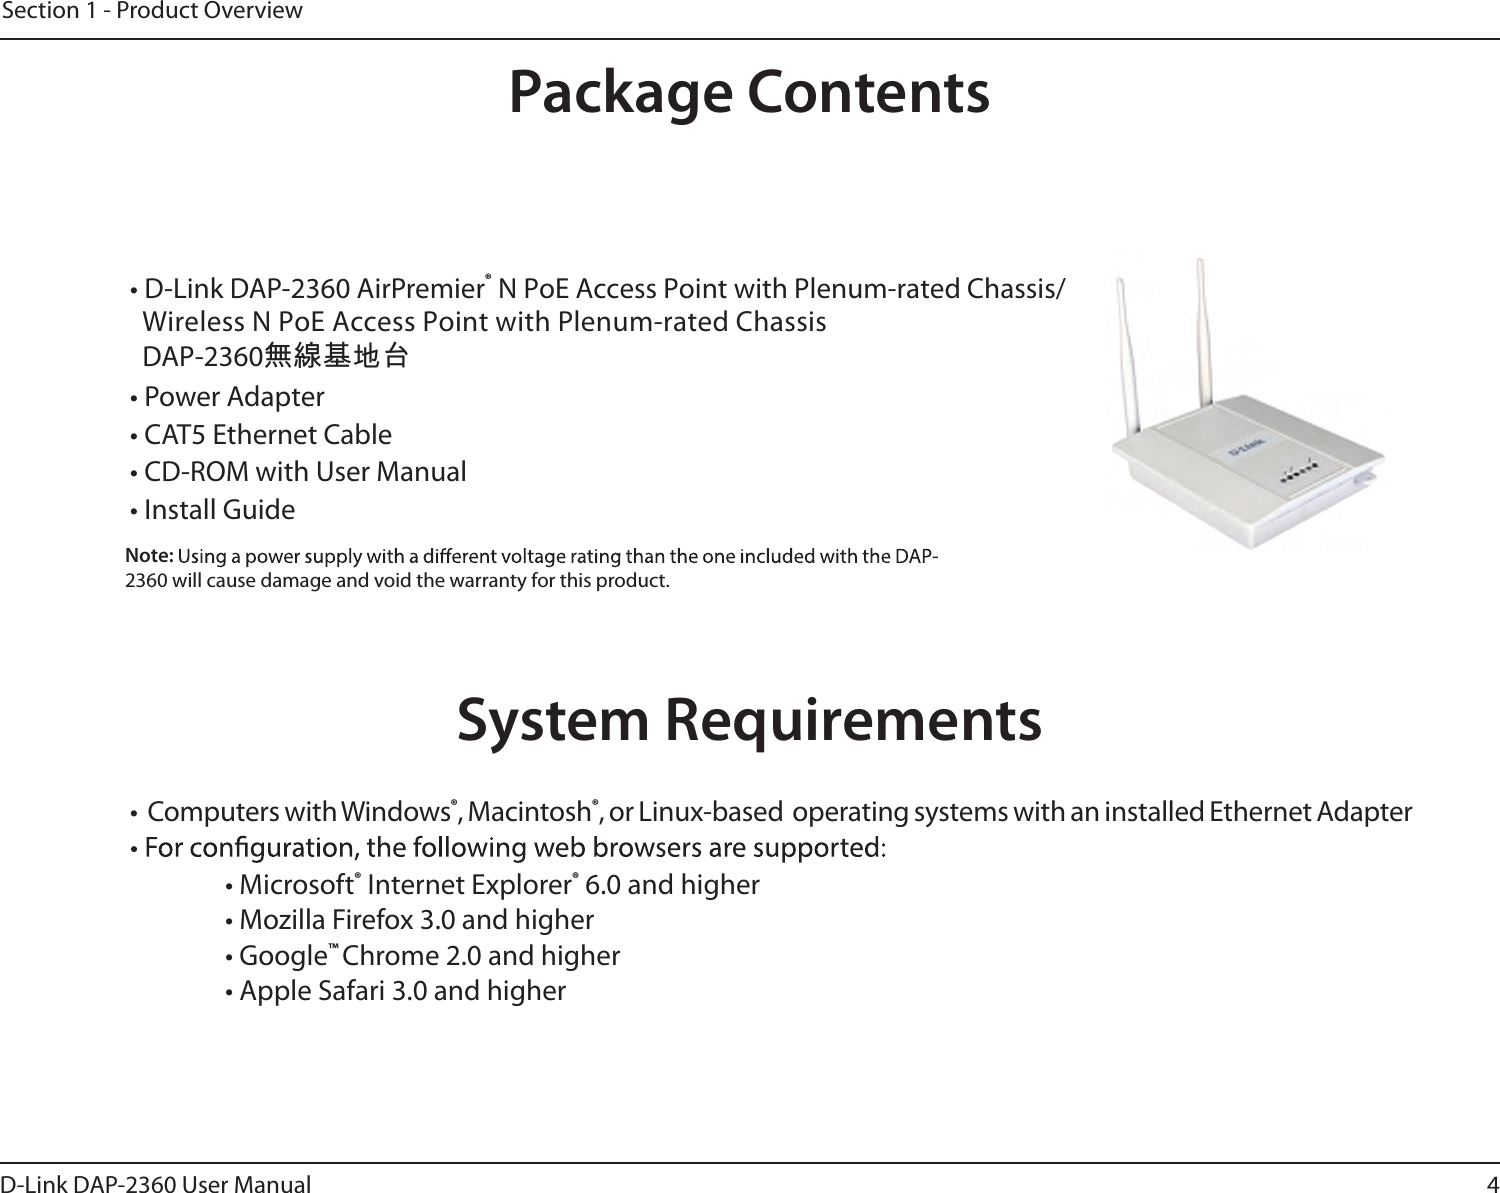 4D-Link DAP-2360 User ManualSection 1 - Product Overview• D-Link DAP-2360 AirPremier  WiDAP-2360無線基地台reless N PoE Access Point with Plenum-rated Chassis® N PoE Access Point with Plenum-rated Chassis/• Power Adapter• CAT5 Ethernet Cable• CD-ROM with User Manual• Install GuideNote: 2360 will cause damage and void the warranty for this product.System Requirements• Computers with Windows®, Macintosh®, or Linux-based  operating systems with an installed Ethernet Adapter     • Microsoft® Internet Explorer® 6.0 and higher      • Mozilla Firefox 3.0 and higher      • Google™ Chrome 2.0 and higher     • Apple Safari 3.0 and higherProduct OverviewPackage Contents